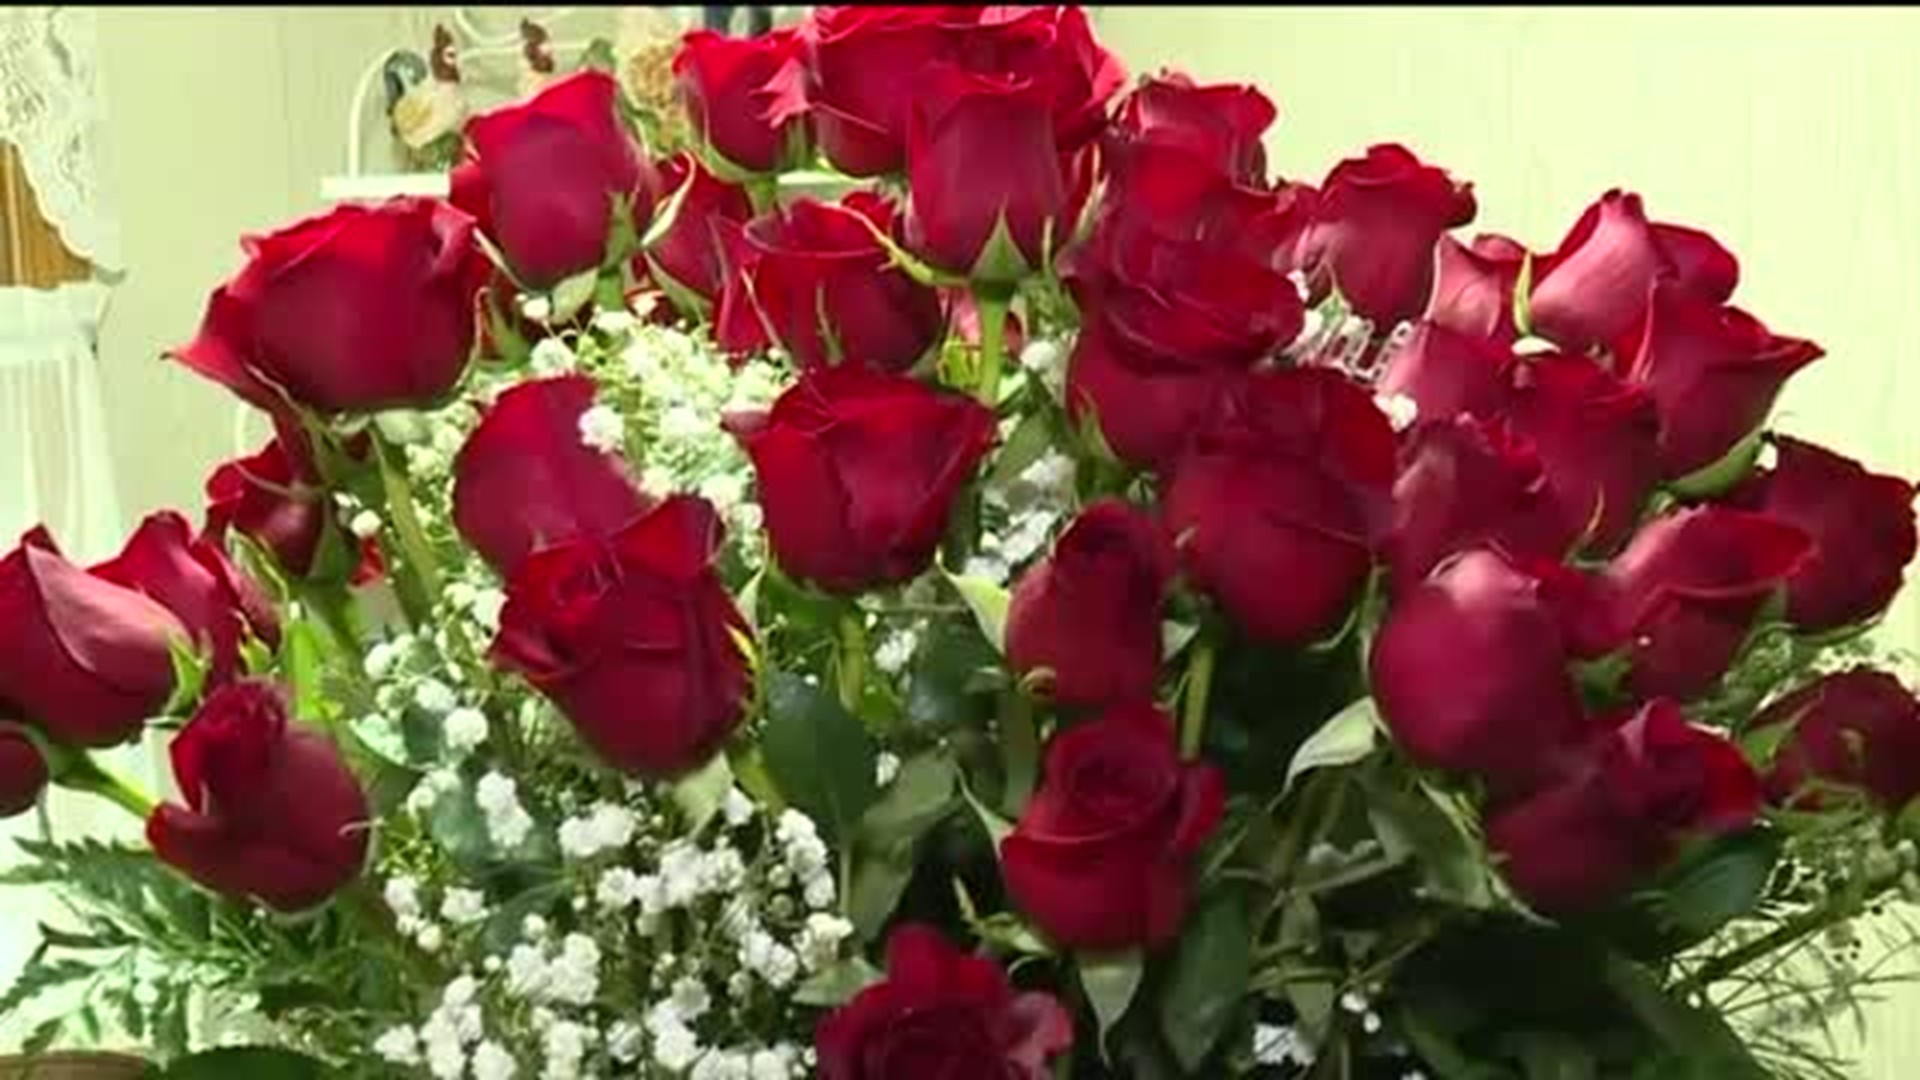 `For love, you can do it` - Romantic Floral Tradition Continues for Union County Couple